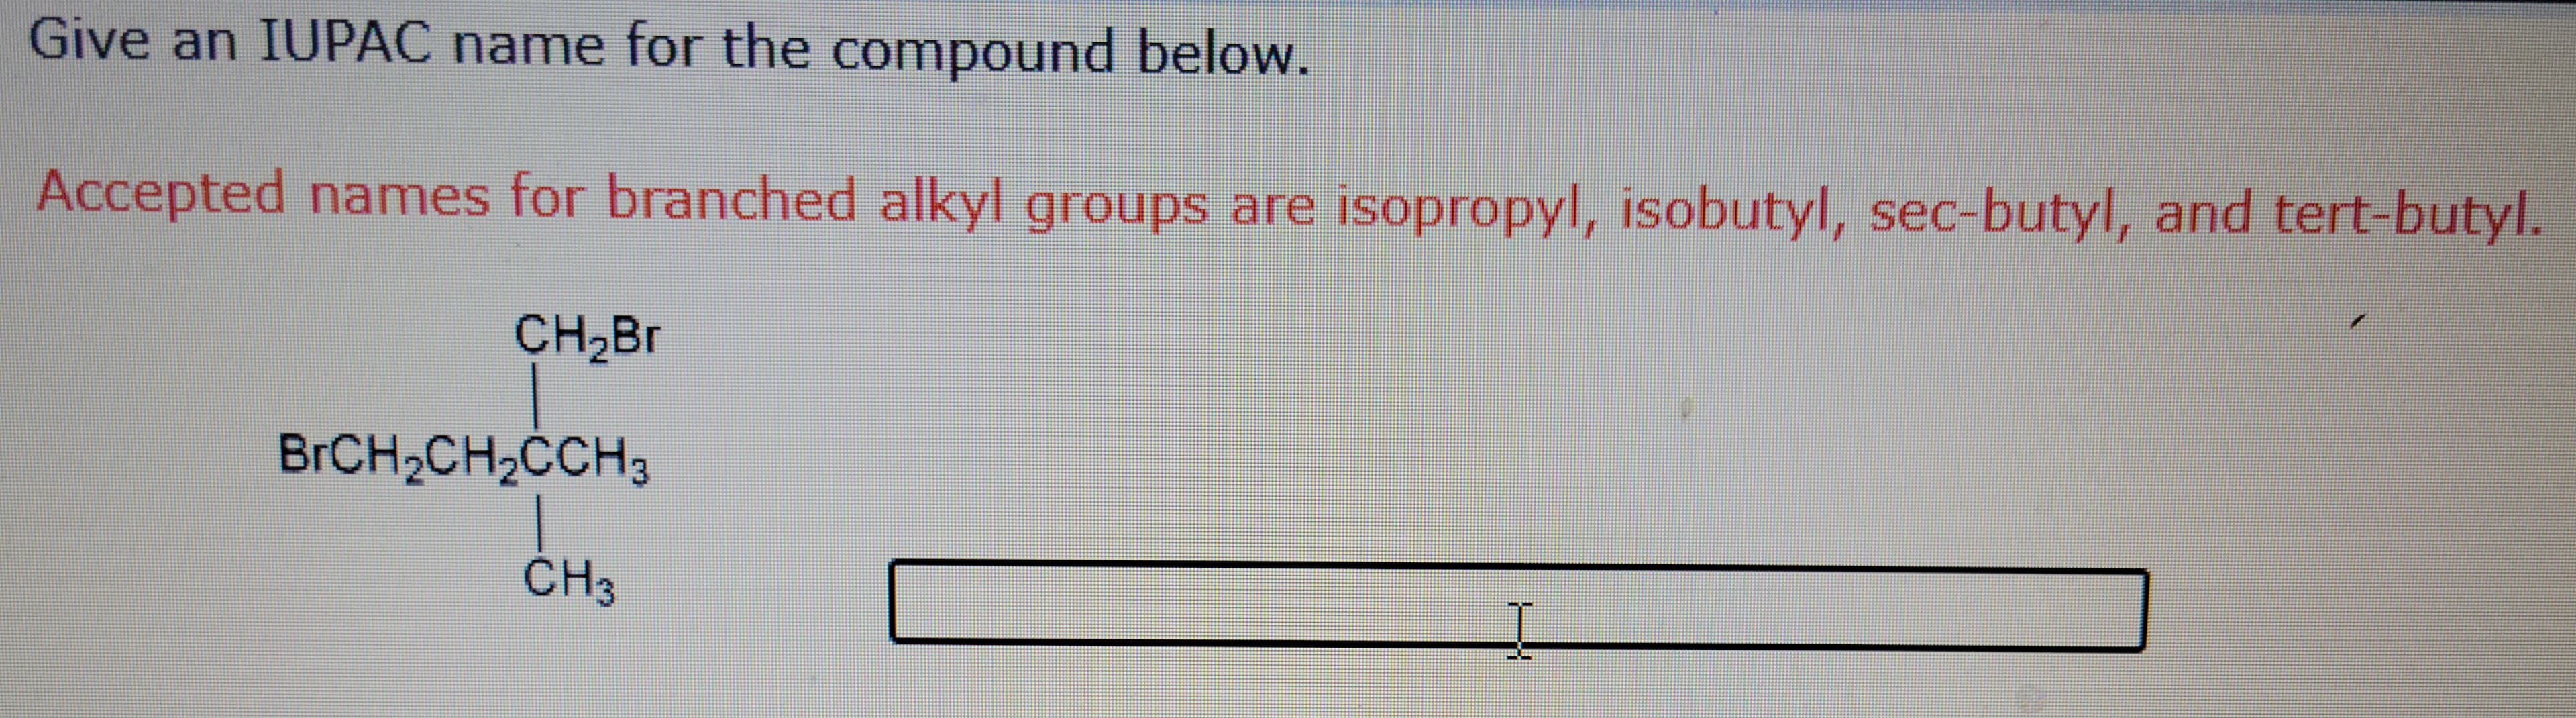 Give an IUPAC name for the compound below.
Accepted names for branched alkyl groups are isopropyl, isobutyl, sec-butyl, and tert-butyl.
CH₂Br
BrCH₂CH₂CCH3
CH₂